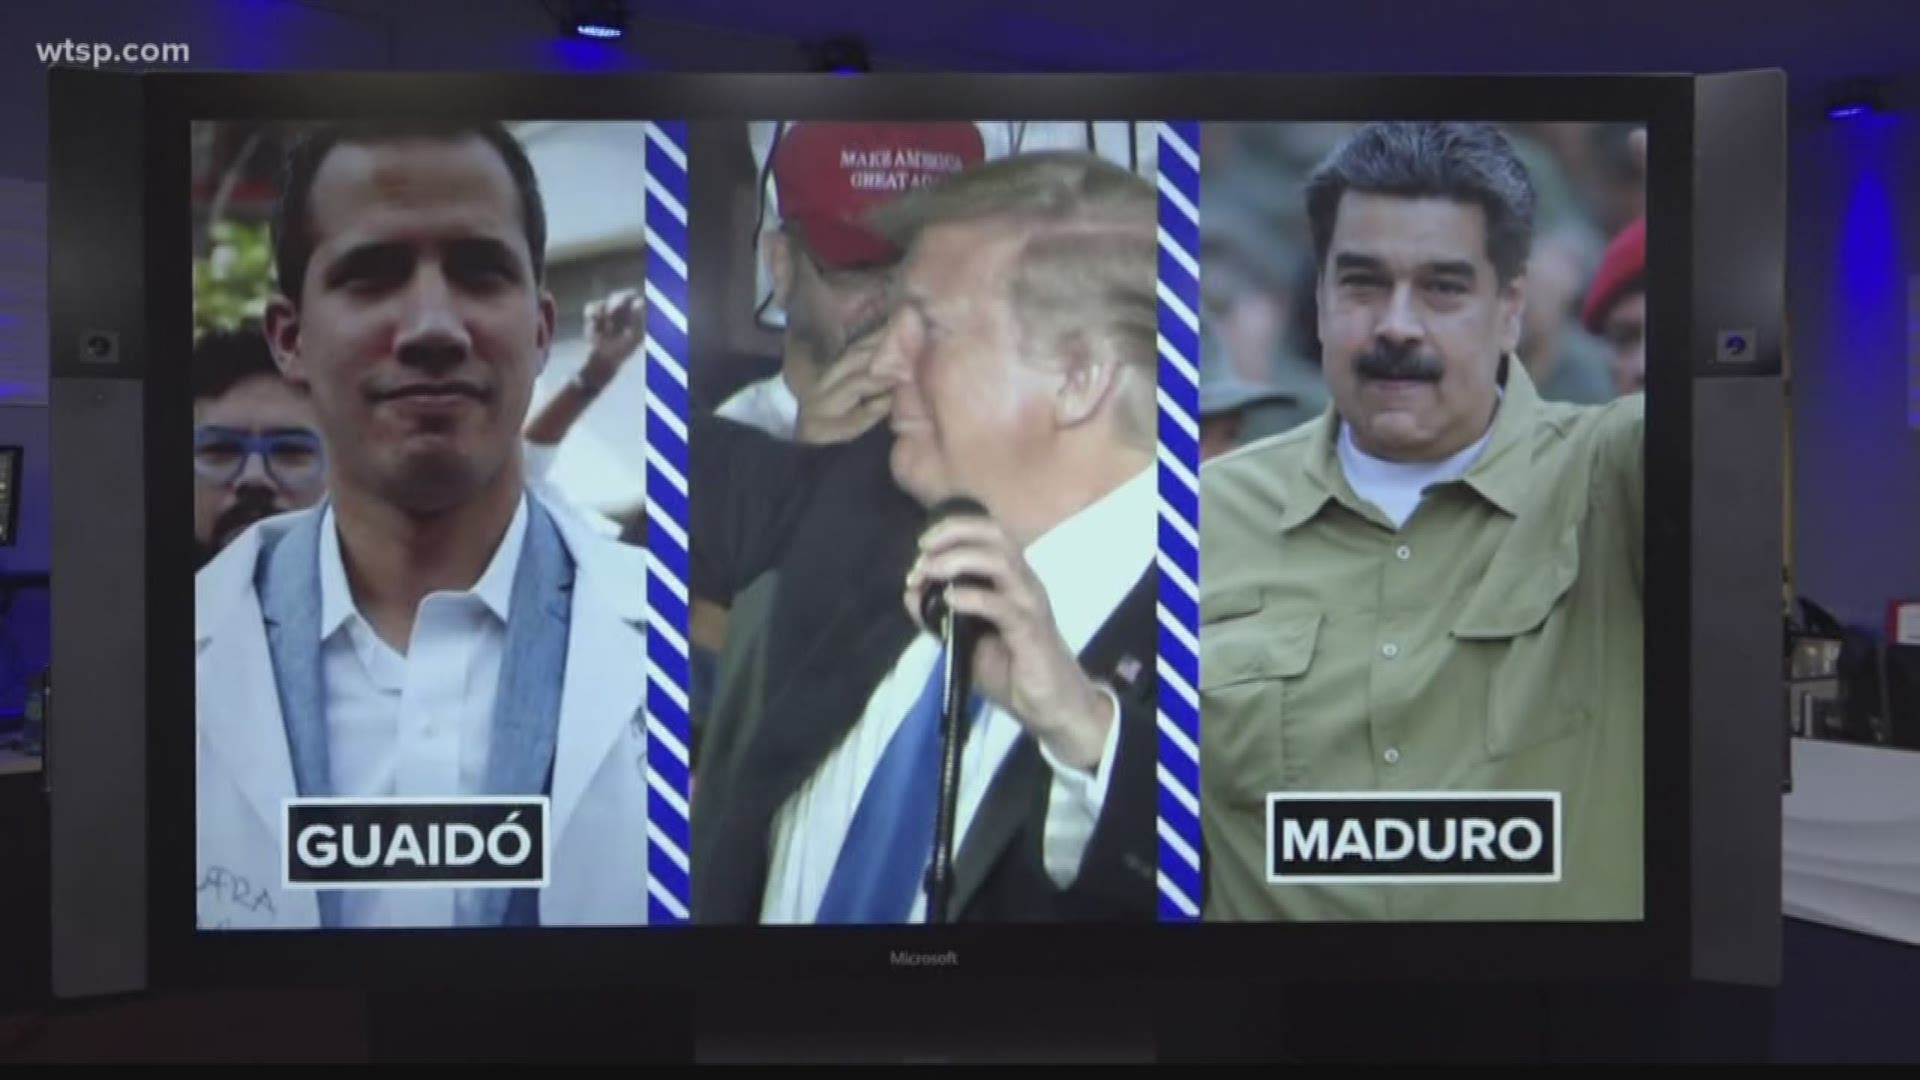 Speaking this week in Miami, President Donald Trump urged Venezuela's military to support the country's opposition leader Juan Guaidó.